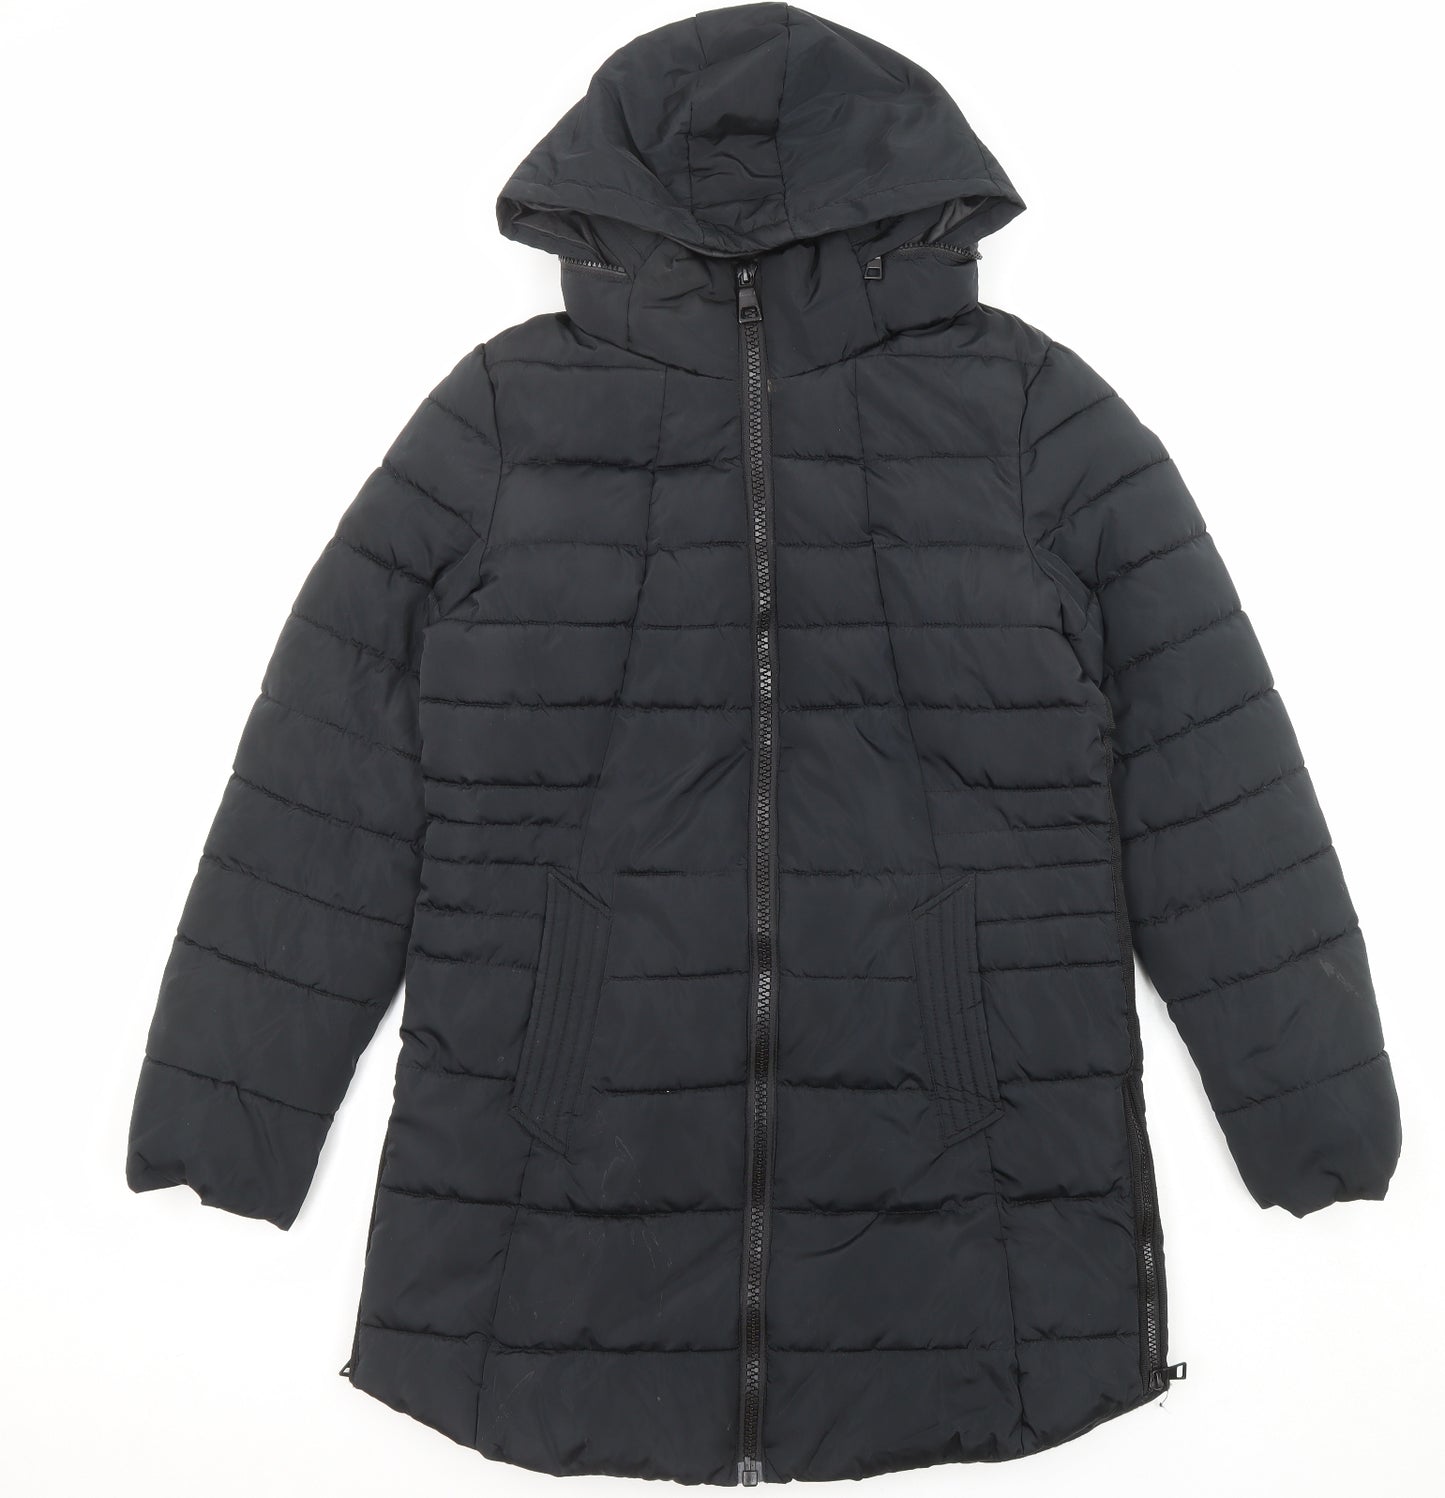 NEXT Womens Black Quilted Coat Size 12 Zip